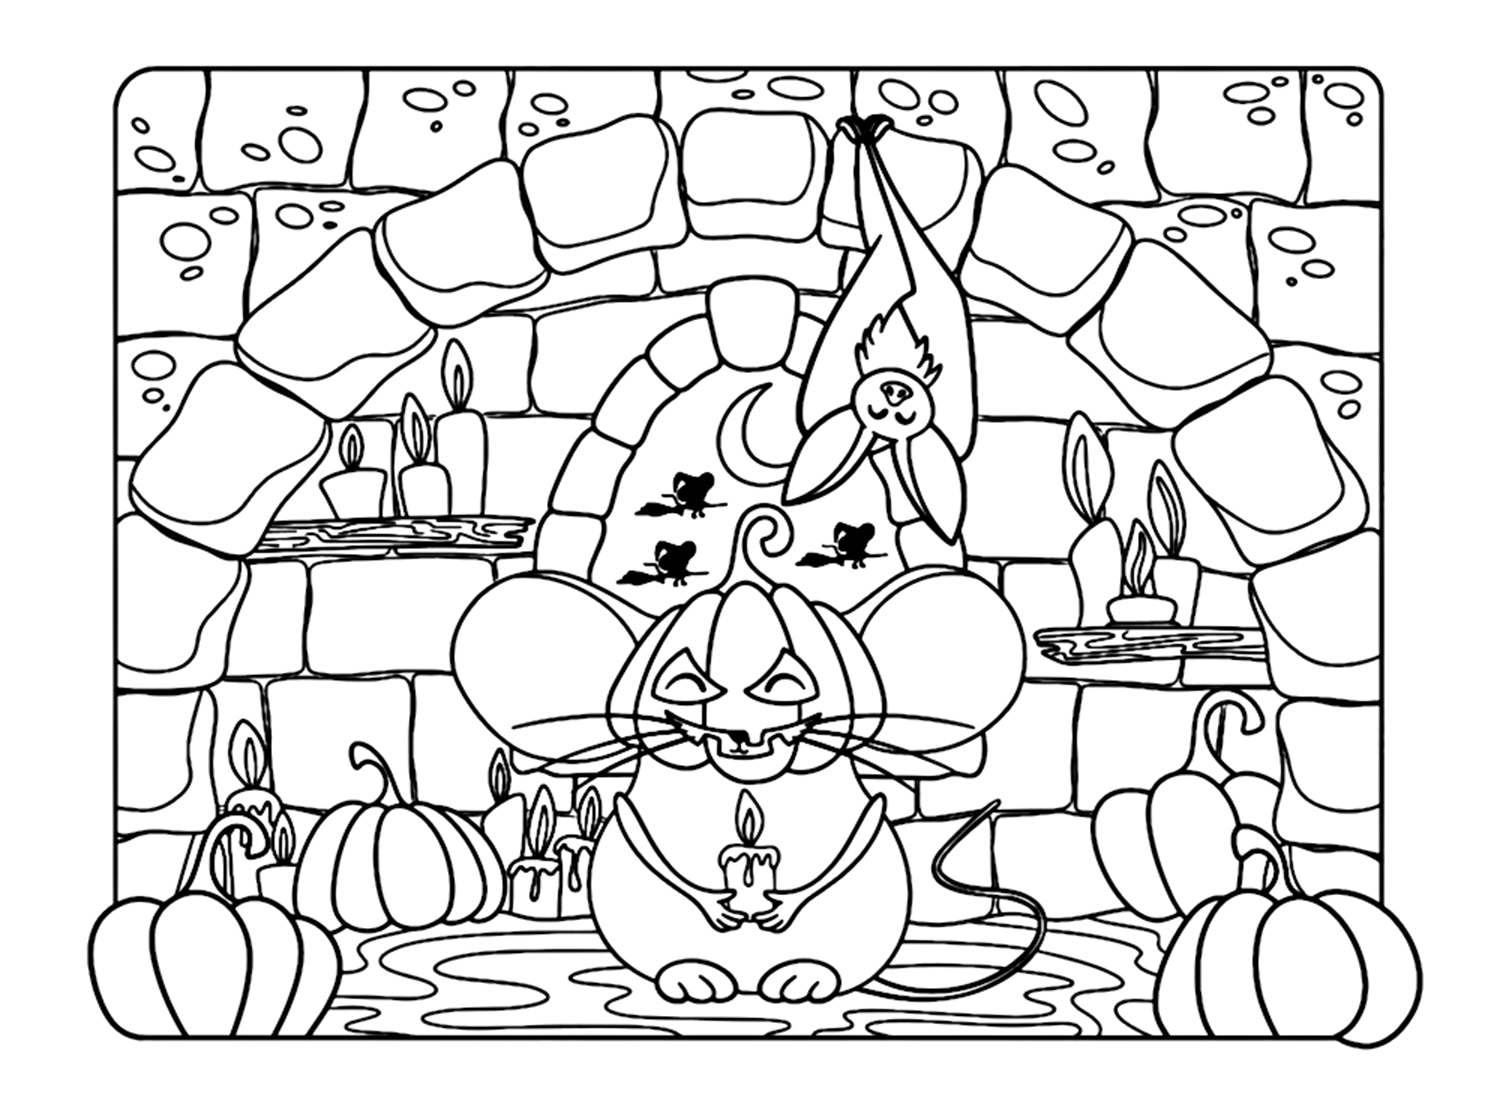 Free Printabl Halloween Bat Coloring Pages from Halloween Bats